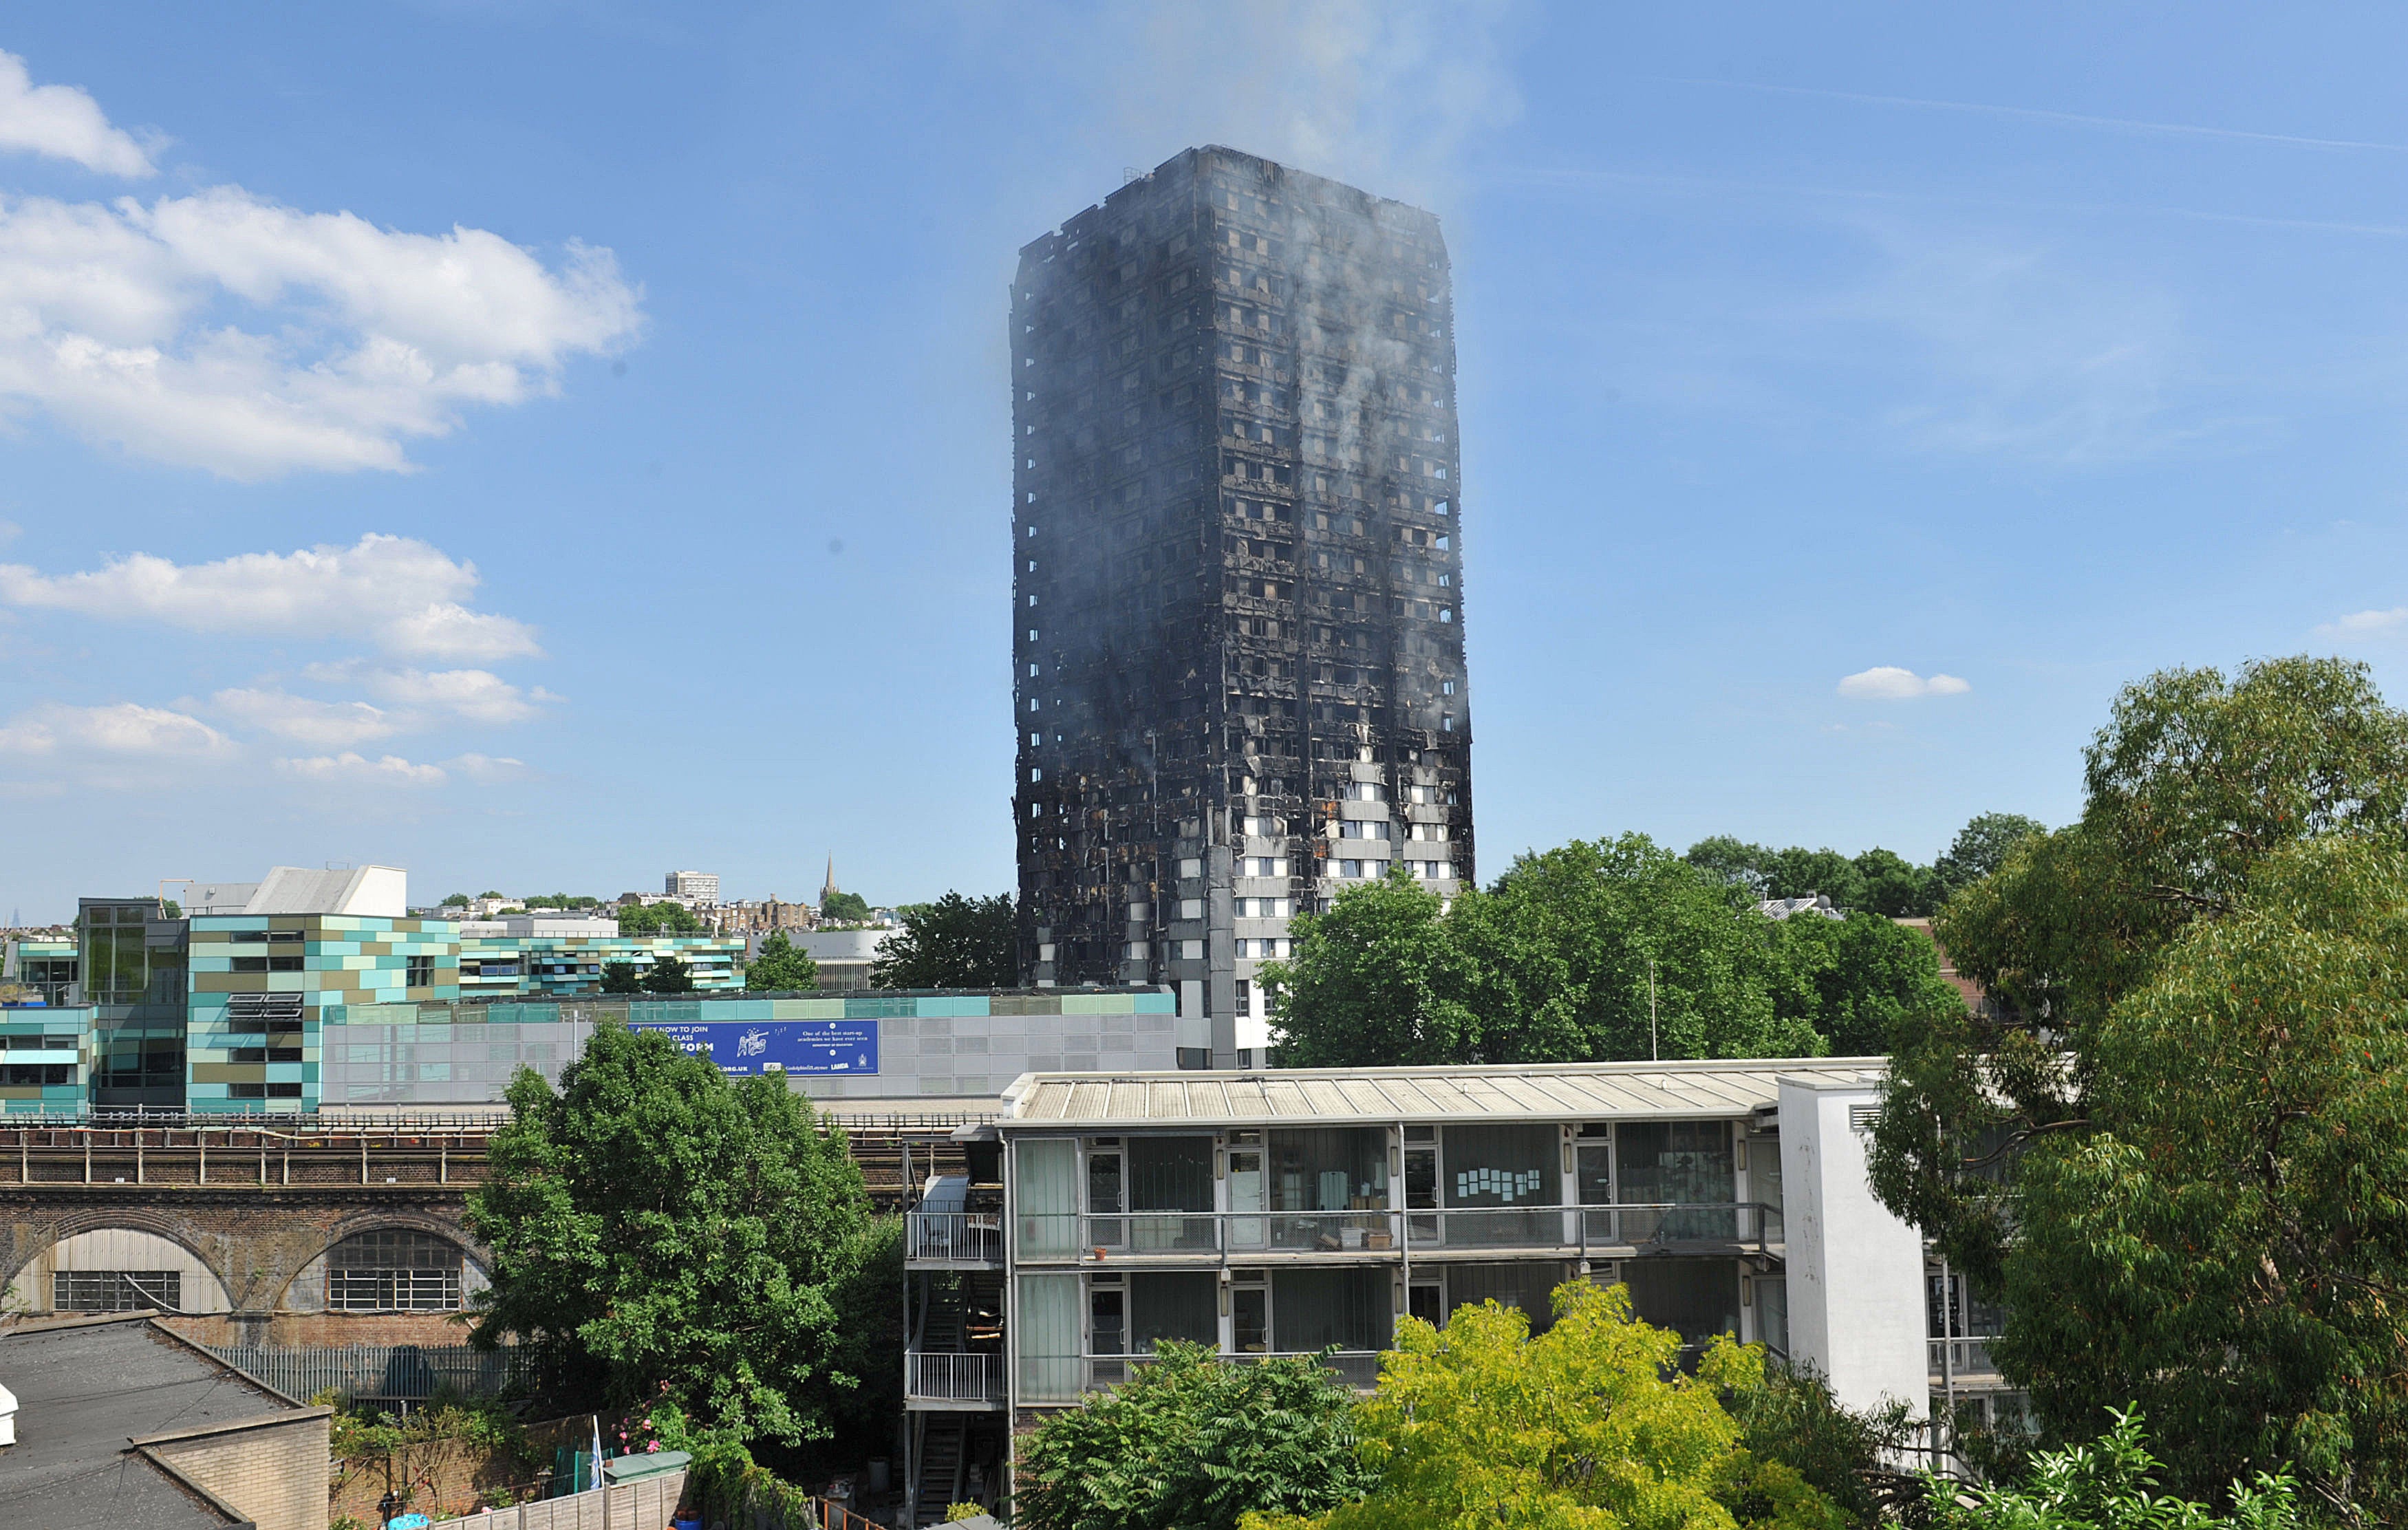 The Grenfell Tower blaze on June 14 2017 killed 72 people (Nick Ansell/PA)